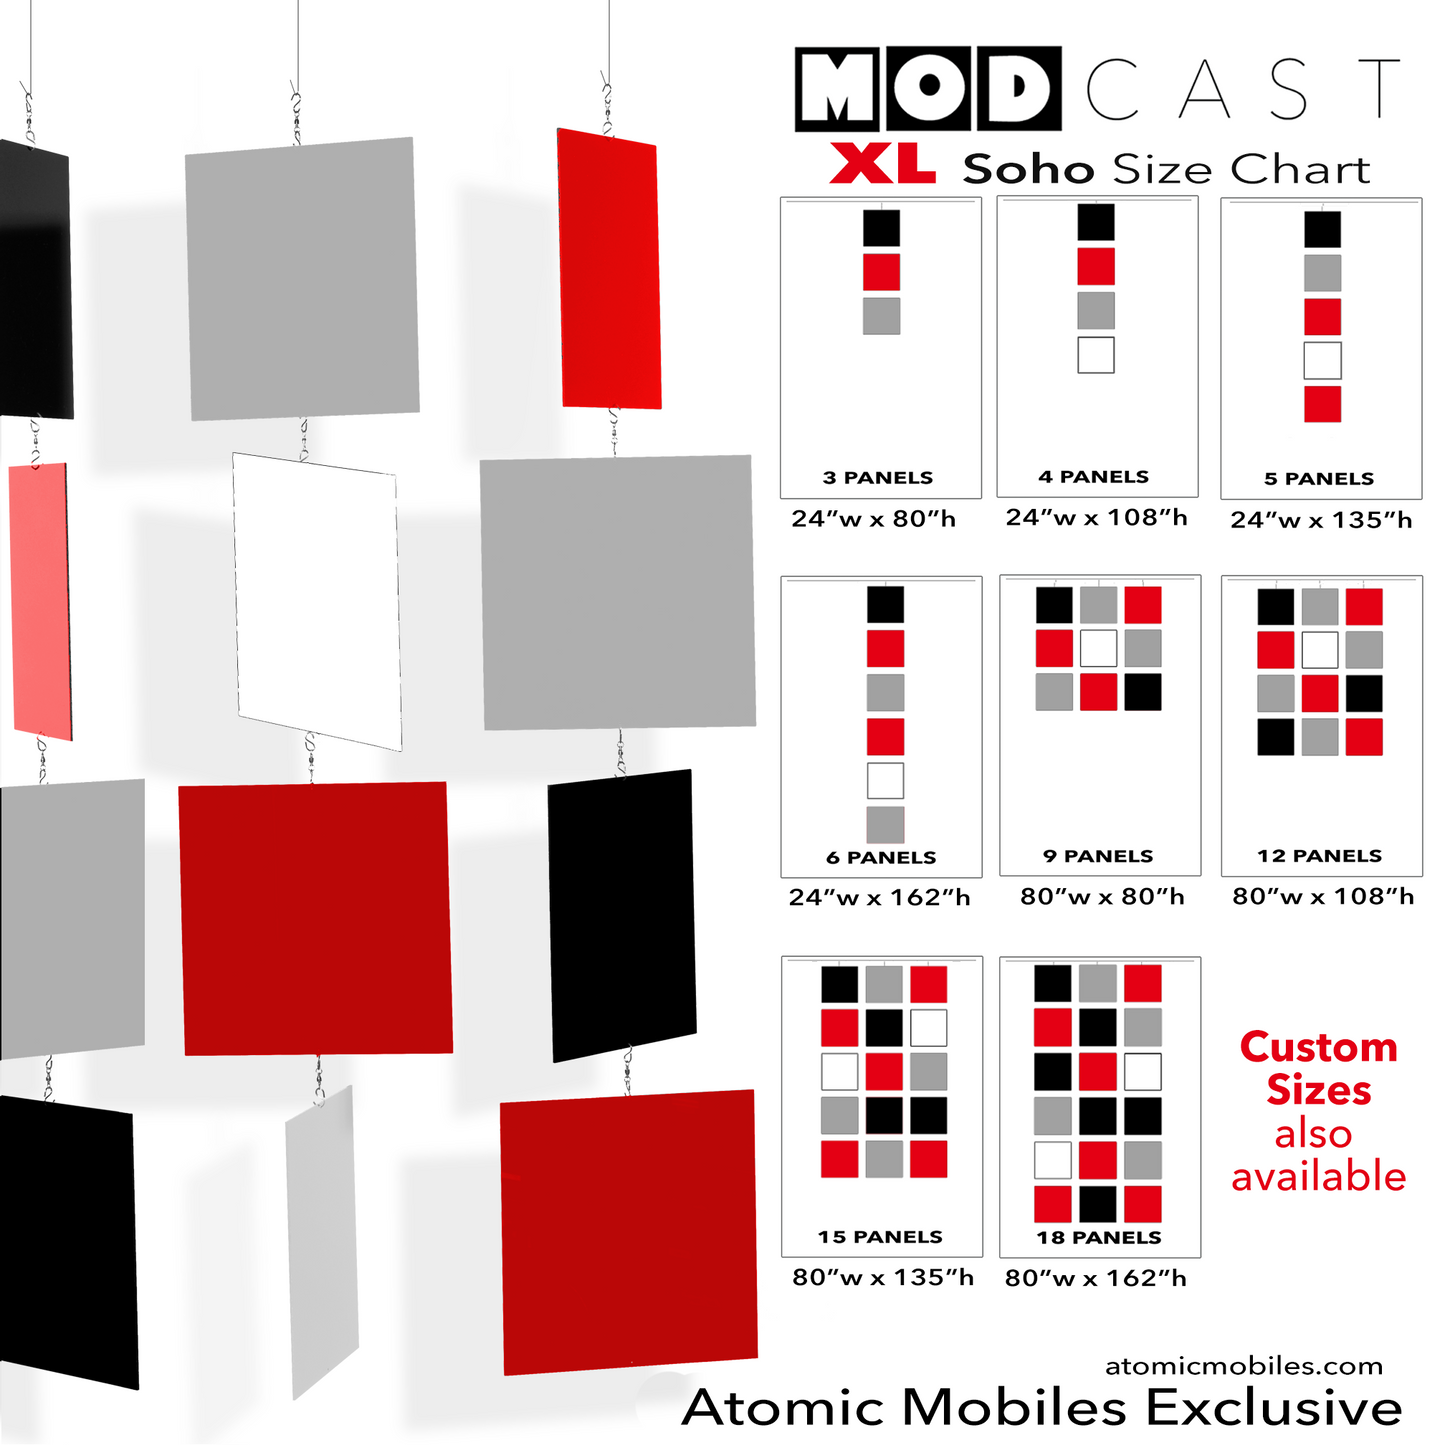 Size Chart for SOHO MODcast XL Architectural Hanging Art Mobiles in Black, Red, Gray, and White - mid century modern inspired hanging kinetic art mobiles by AtomicMobiles.com